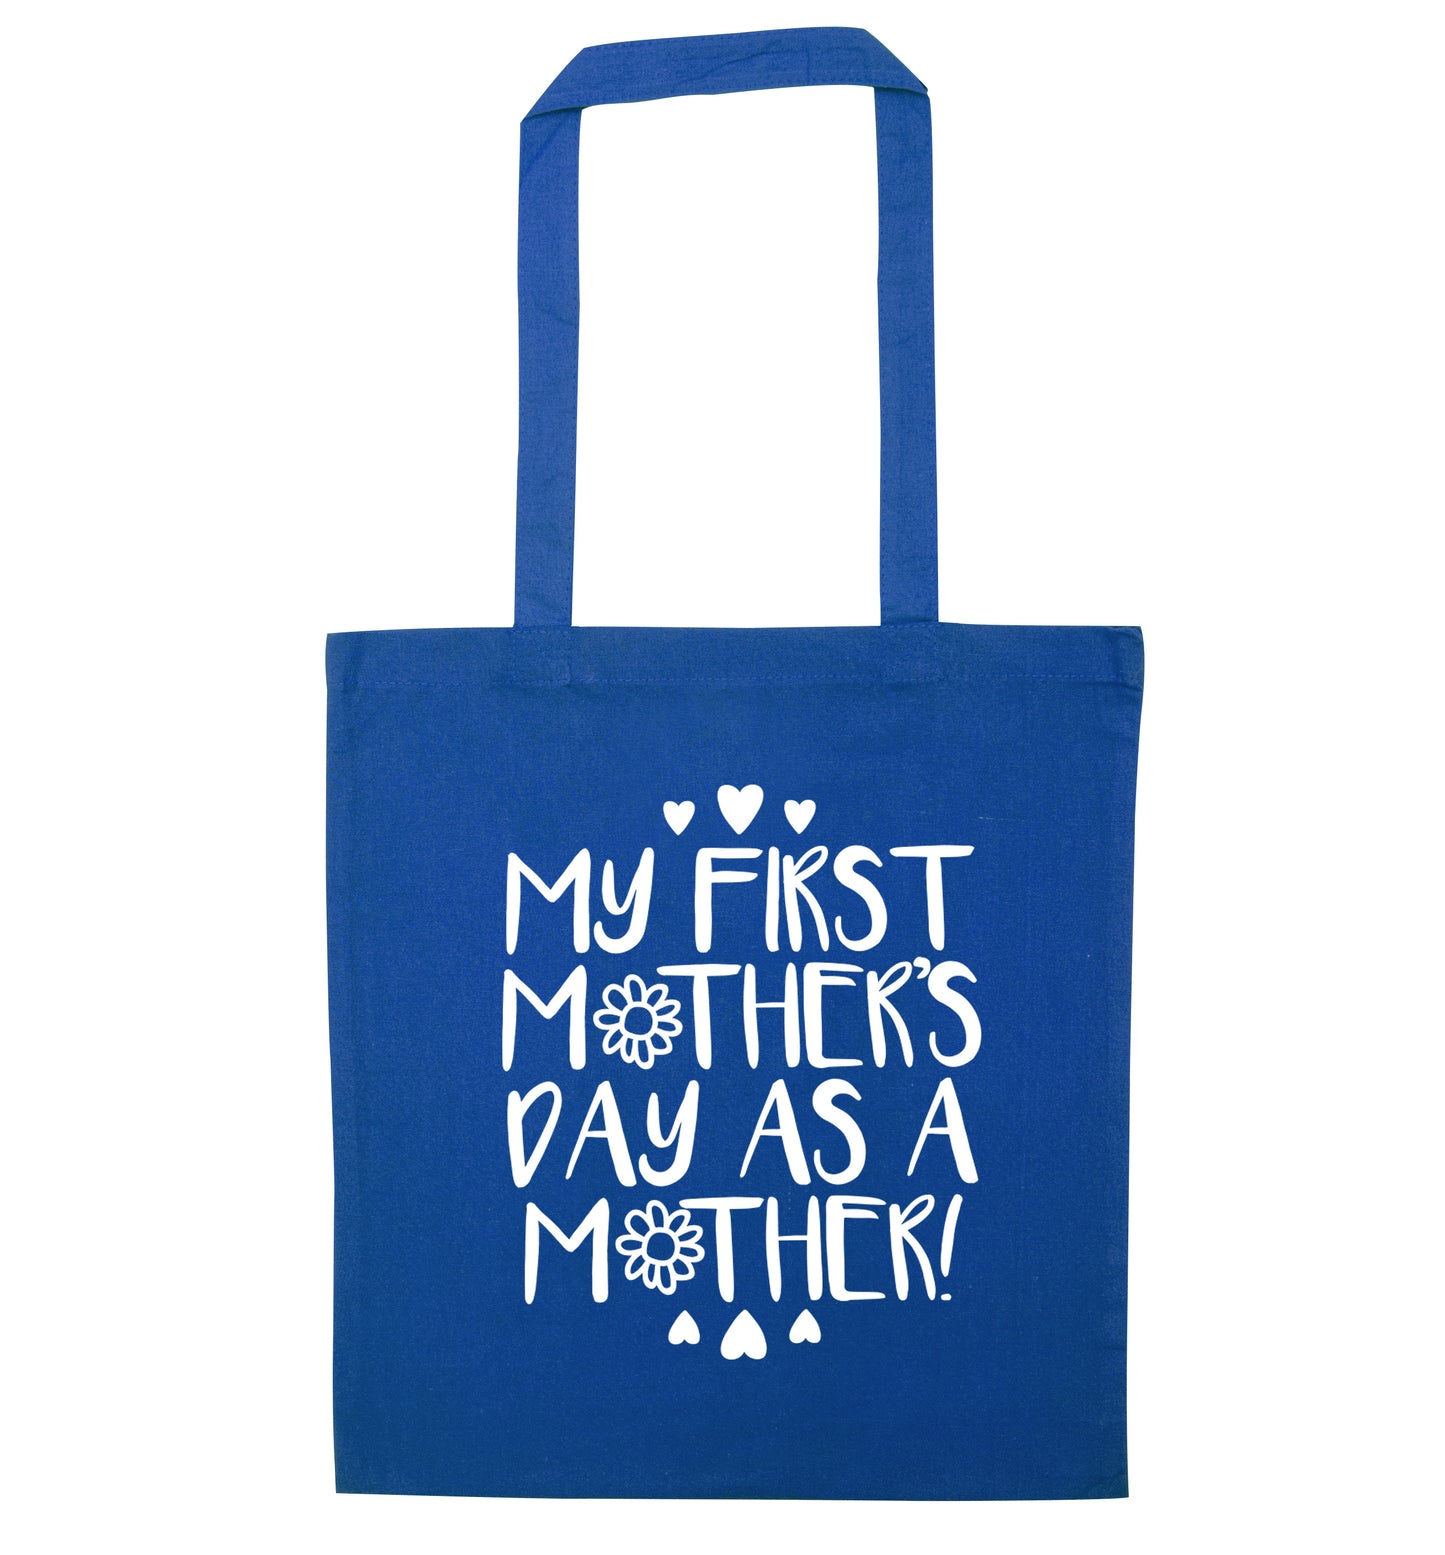 My first mother's day as a mother blue tote bag